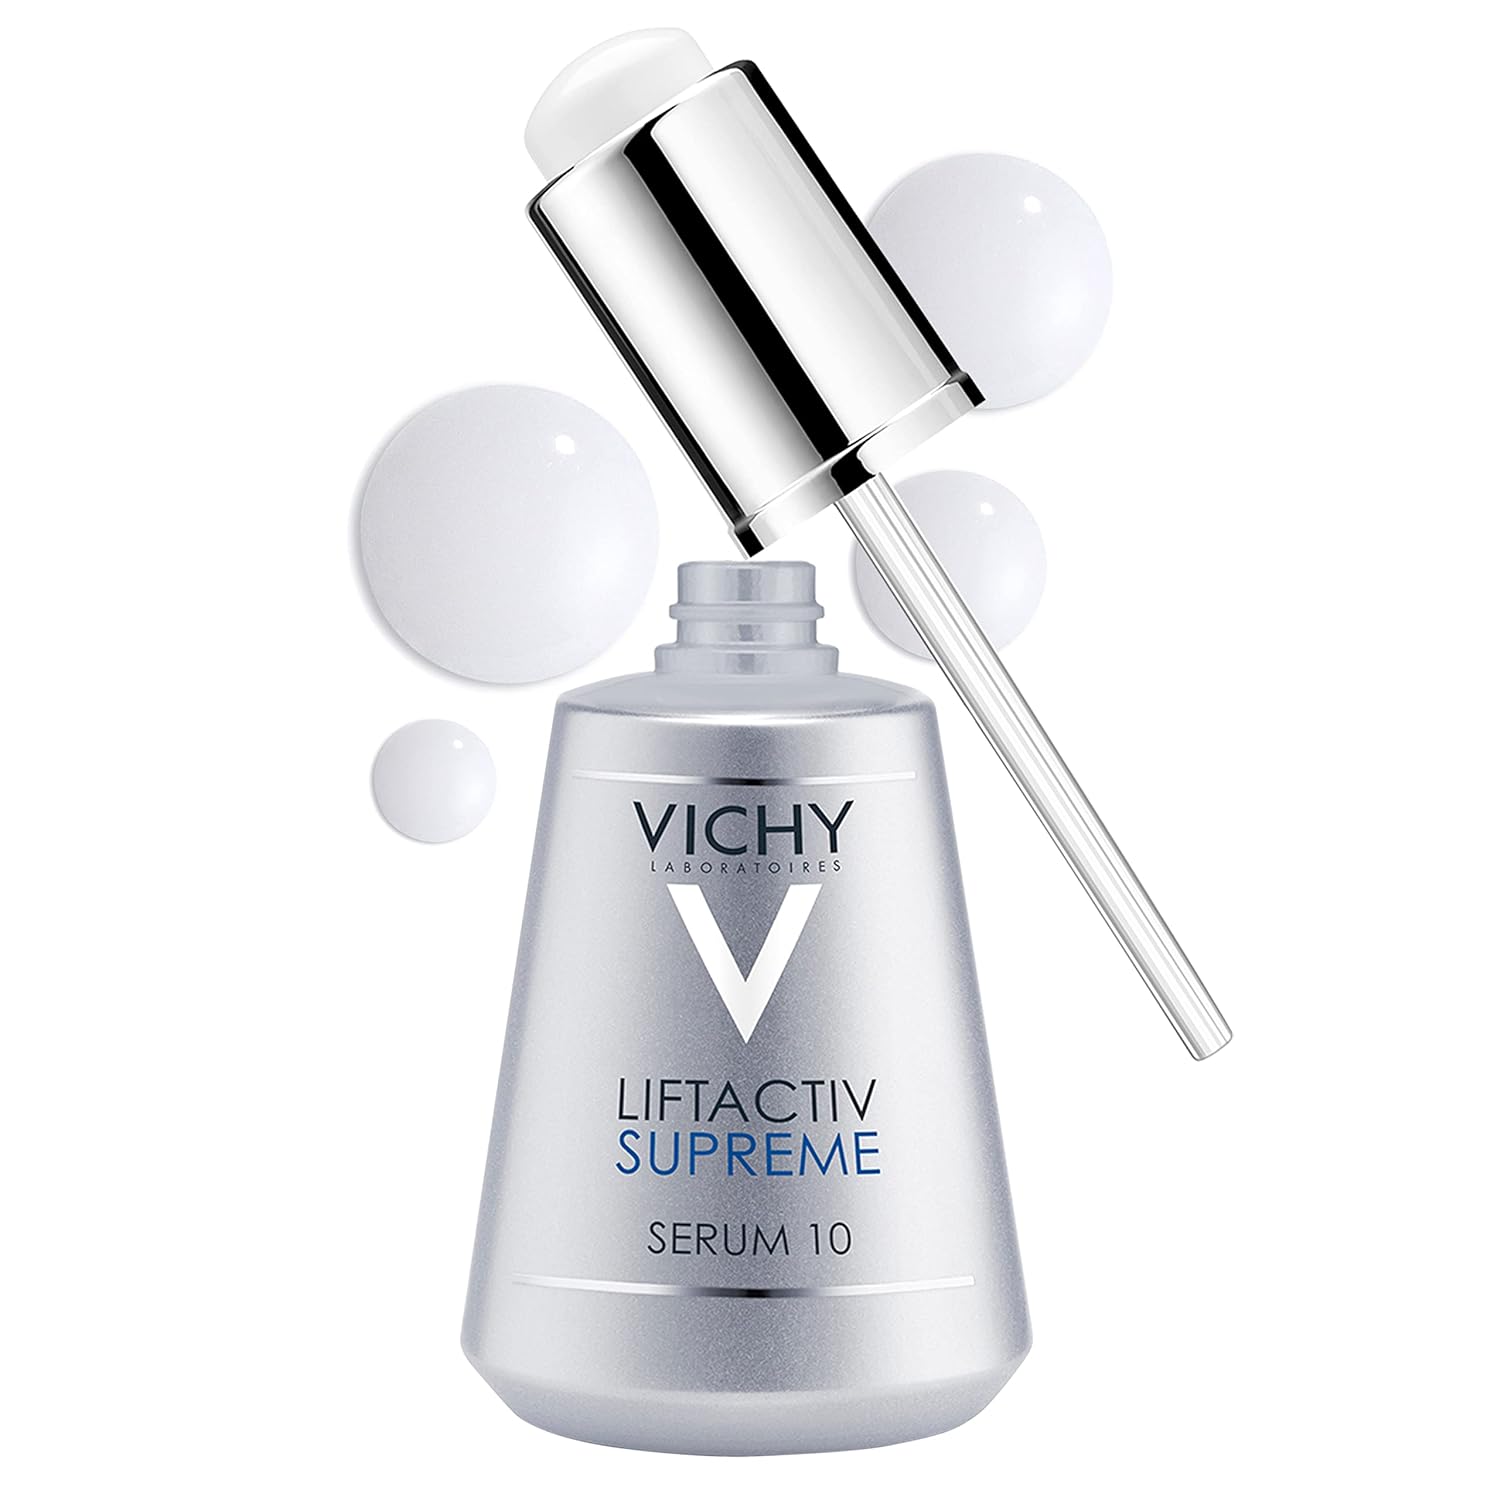 Vichy LiftActiv Supreme Serum 10, Hyaluronic Acid Serum for Face, Face Hydrating Serum & Anti Aging Serum, Reduce Fine Lines and Wrinkles, Moisturizing for Sensitive Skin